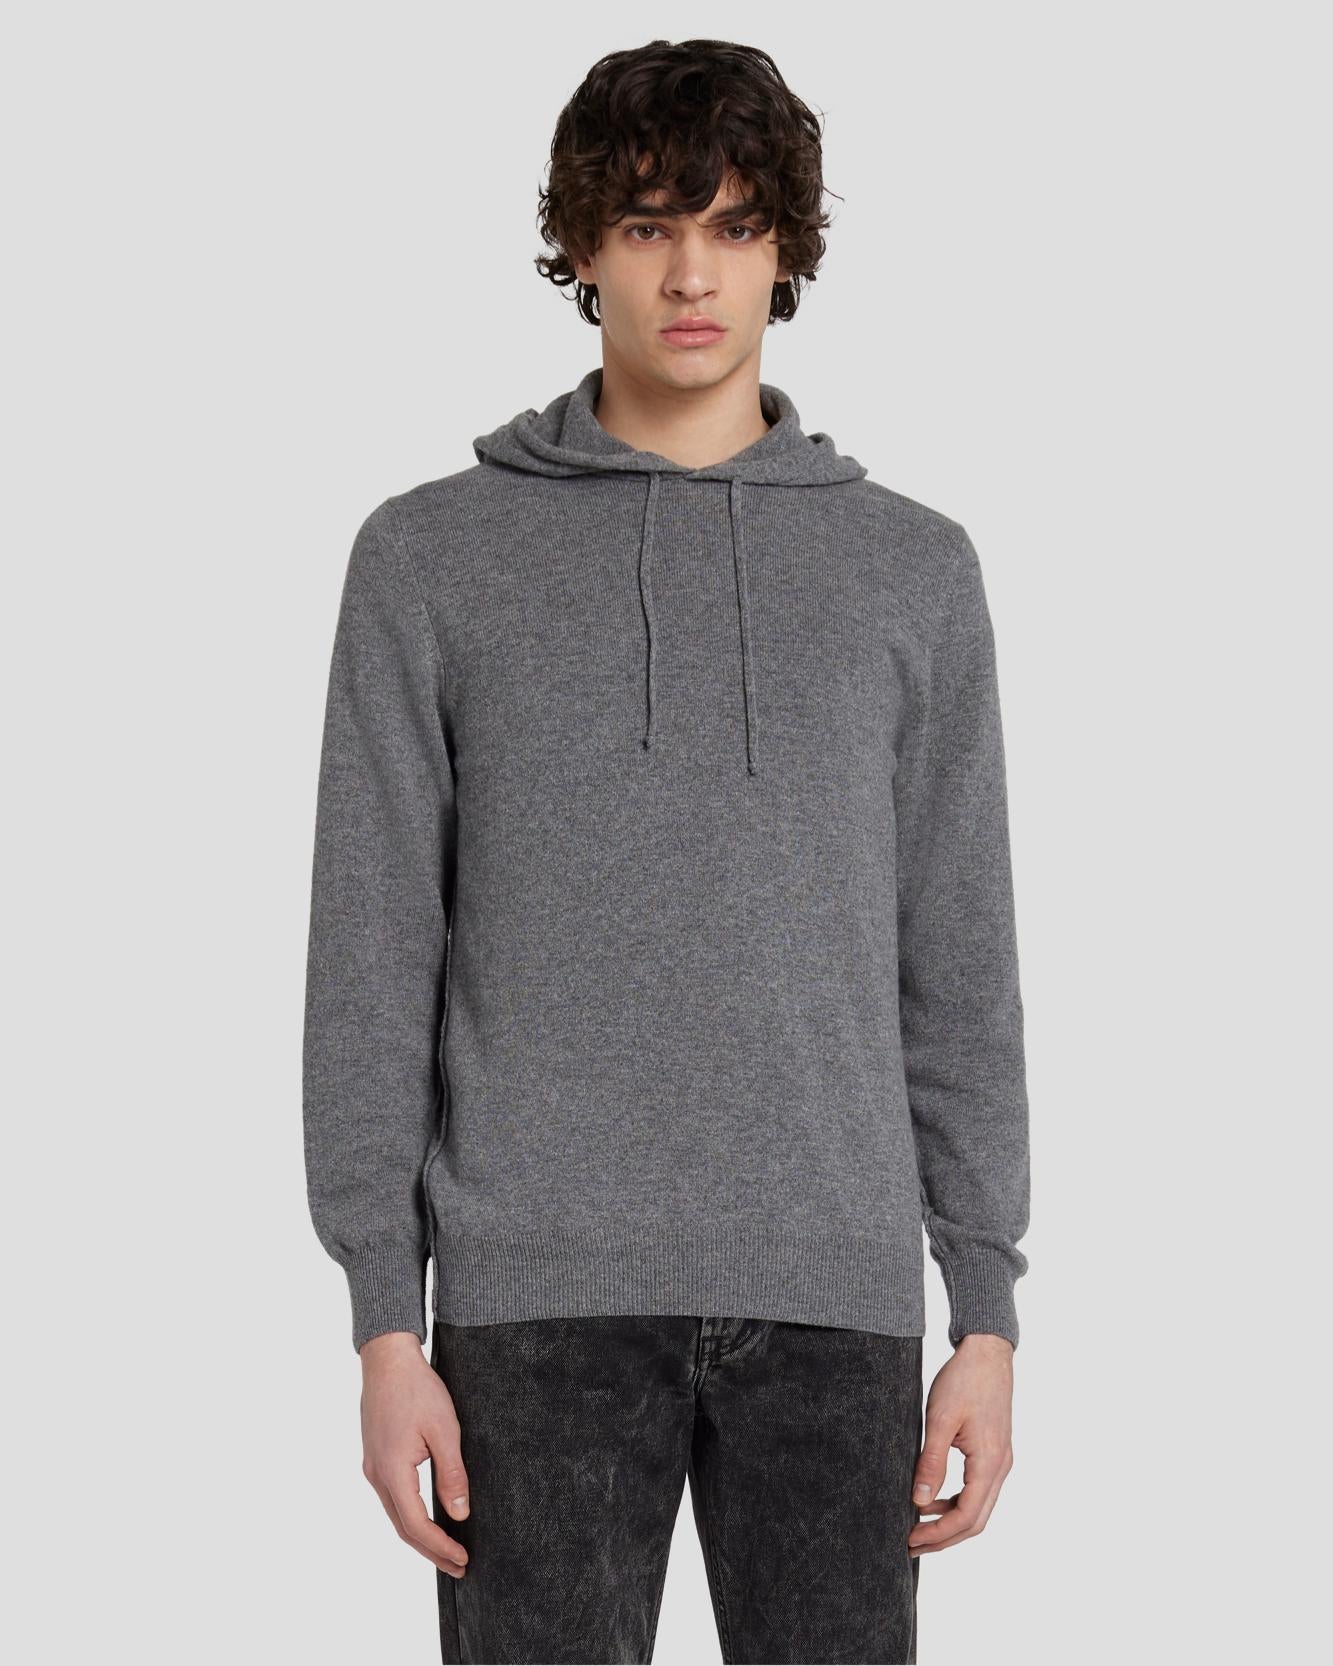 Cashmere Hoodie in Heather Grey | 7 For All Mankind